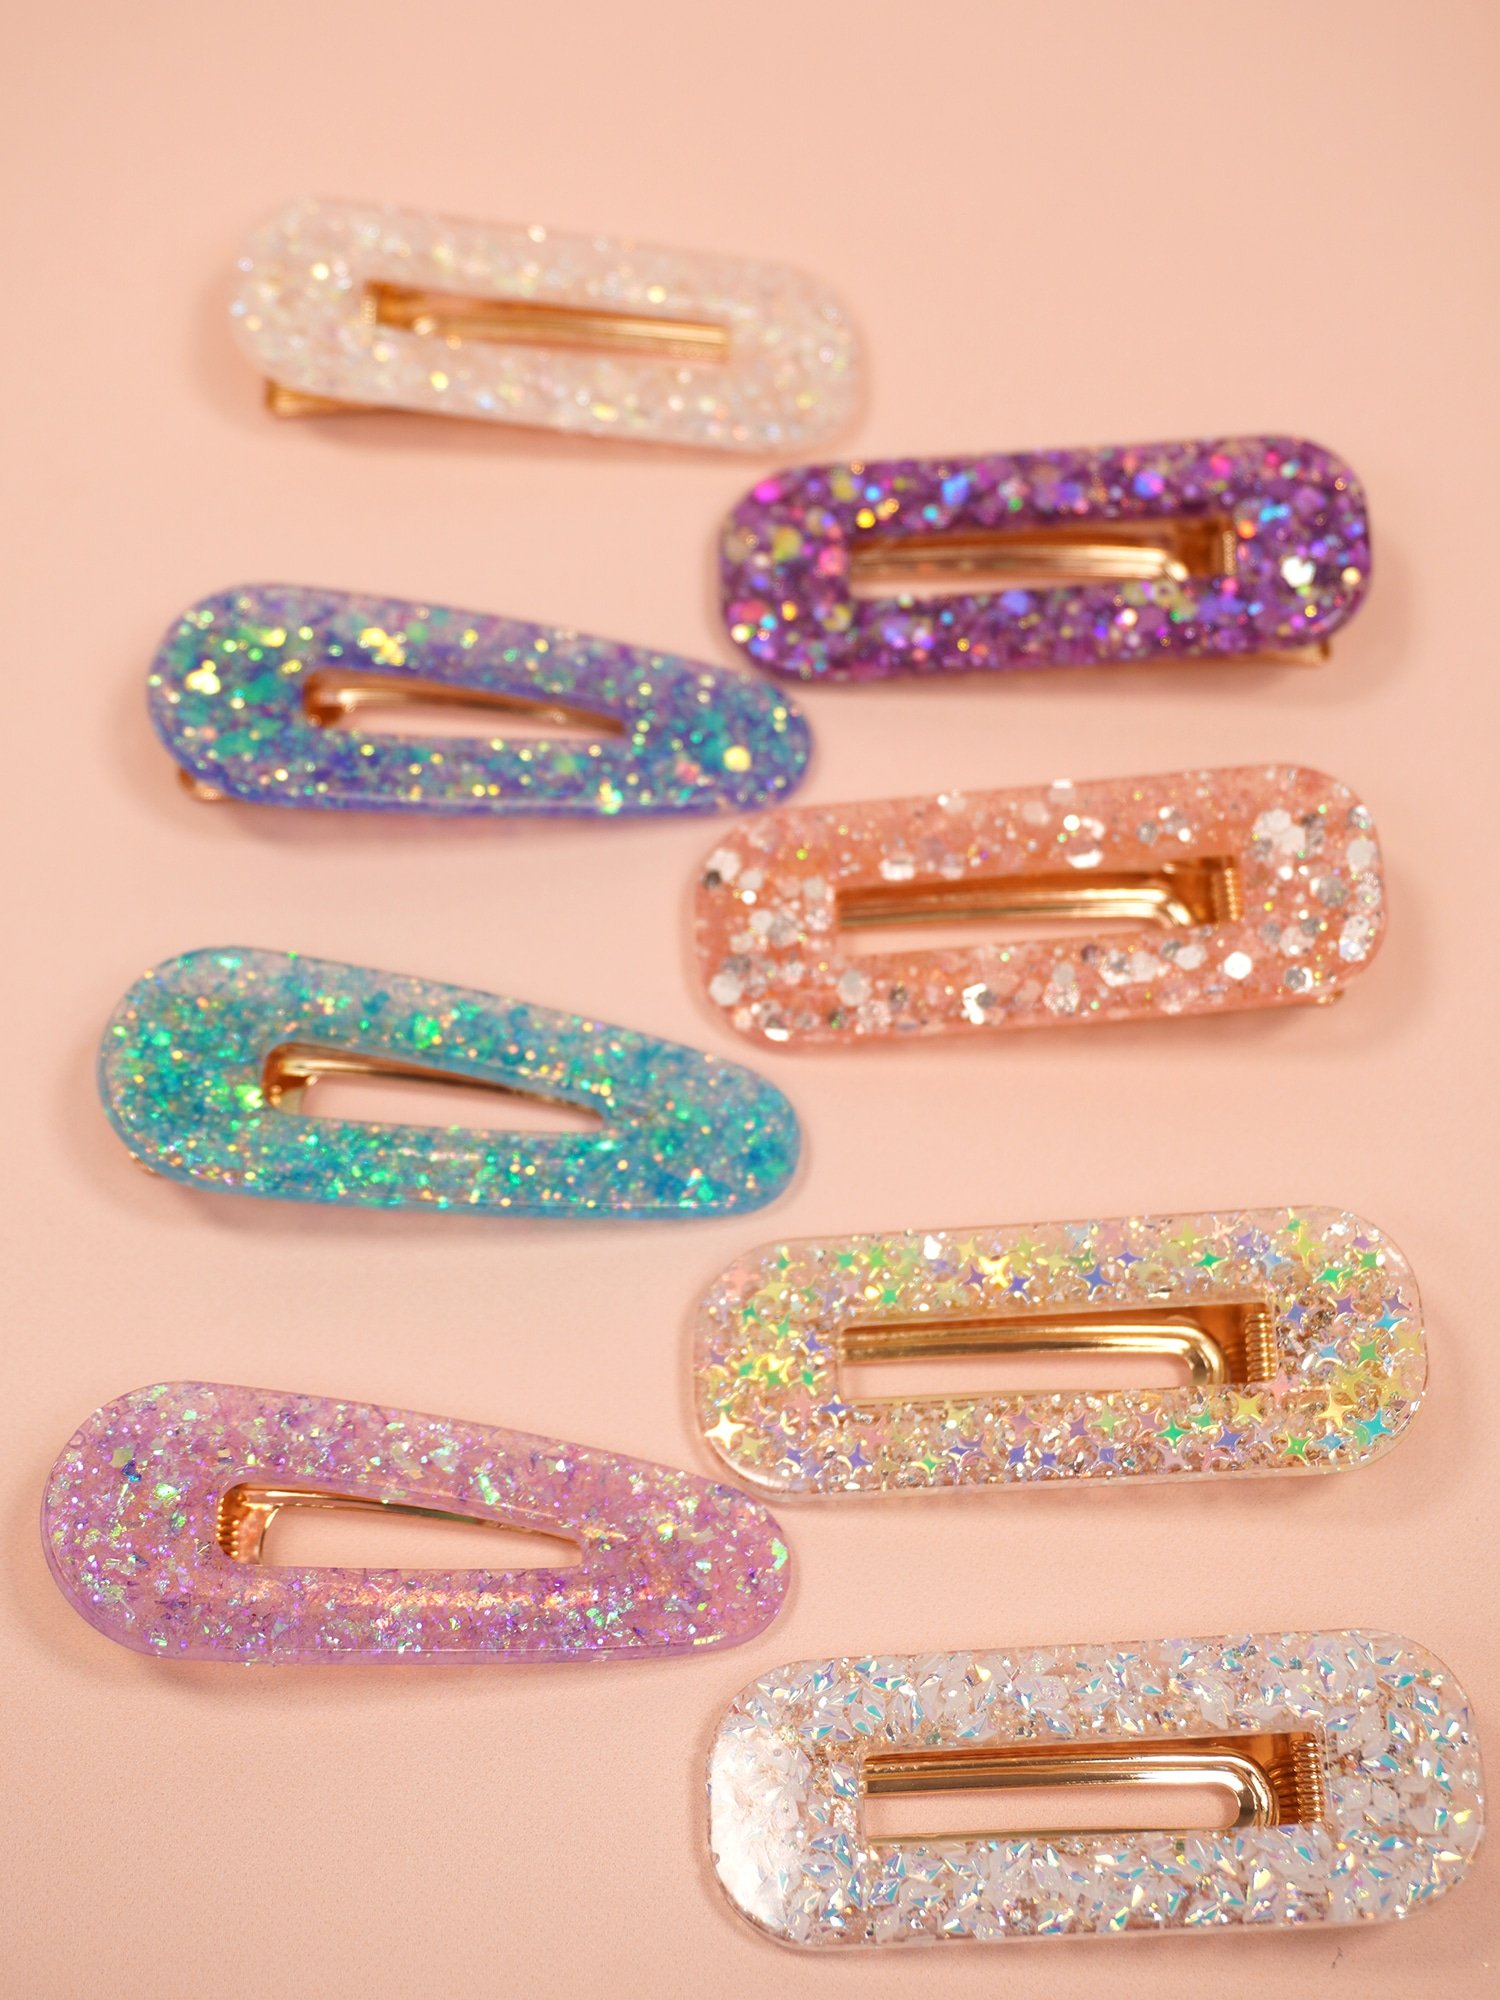 DIY resin barrettes and hair clips